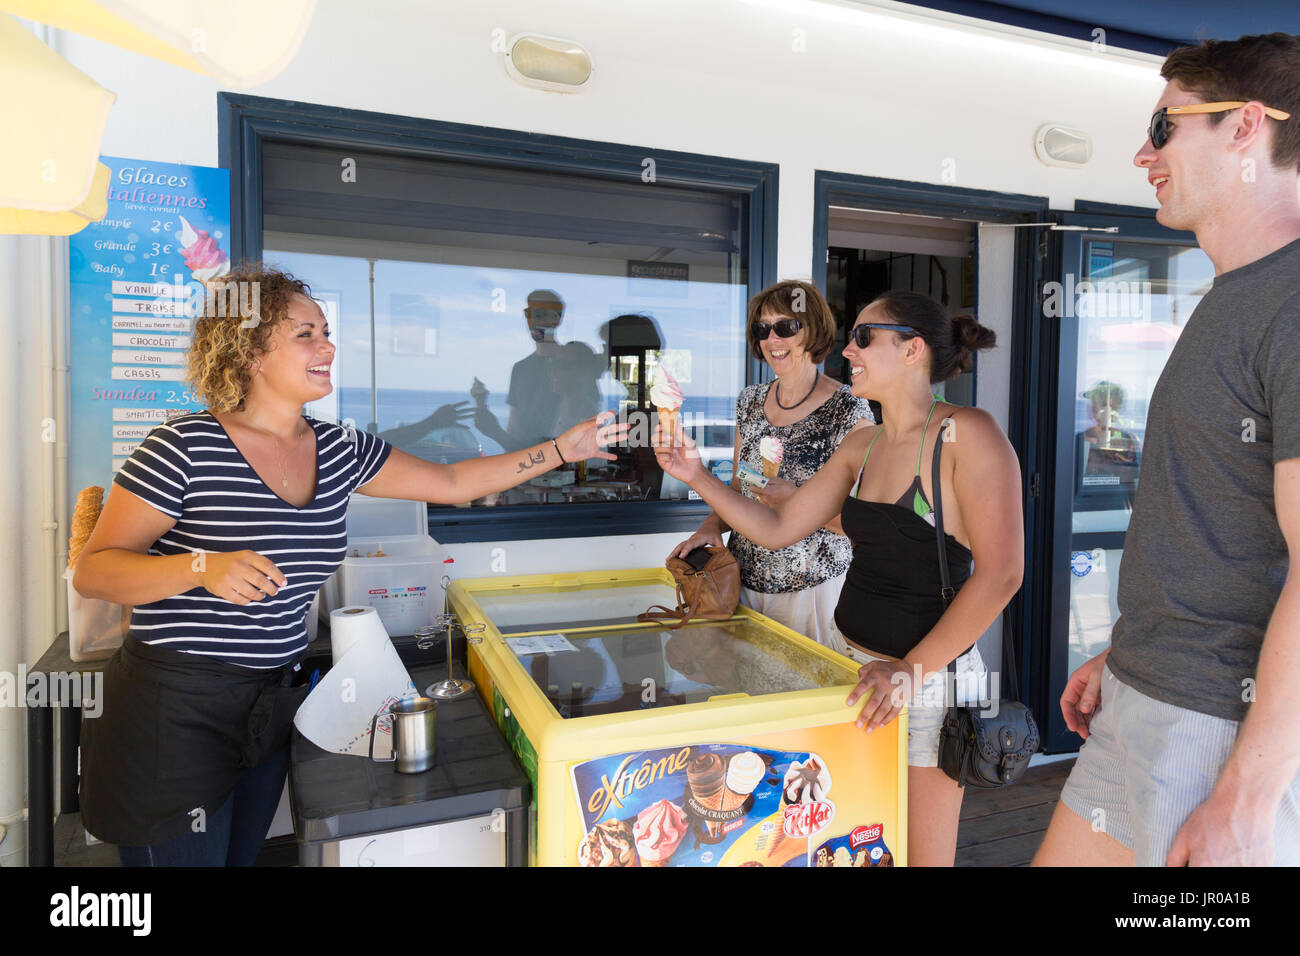 Tourists buying ice cream from a stallholder, Trevignon, Finistere, Brittany France Europe Stock Photo